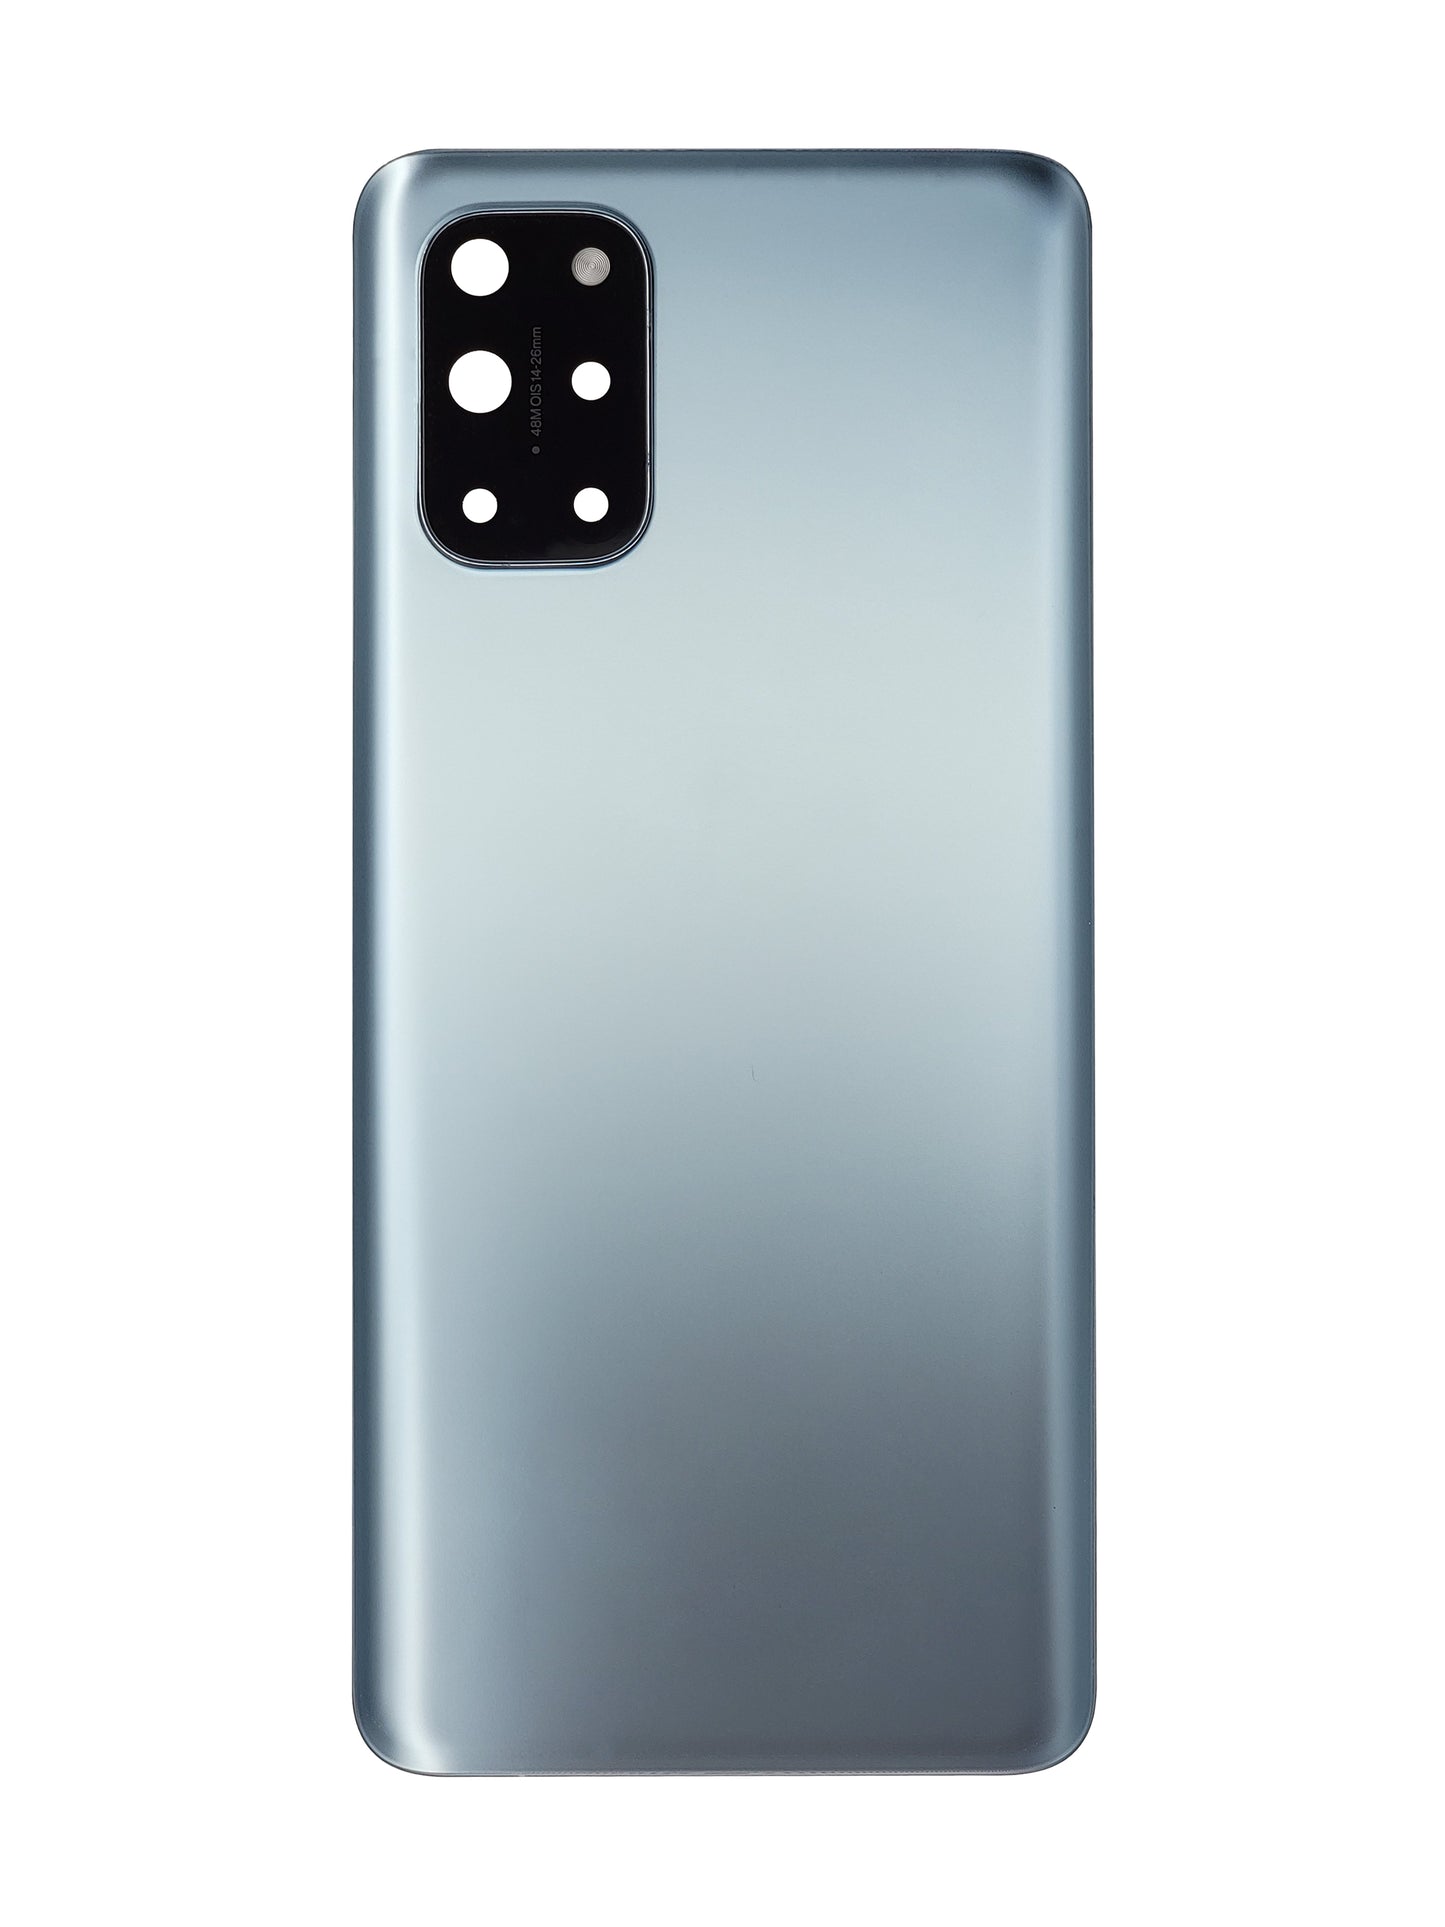 OPS 1+8T Back Cover (Silver)